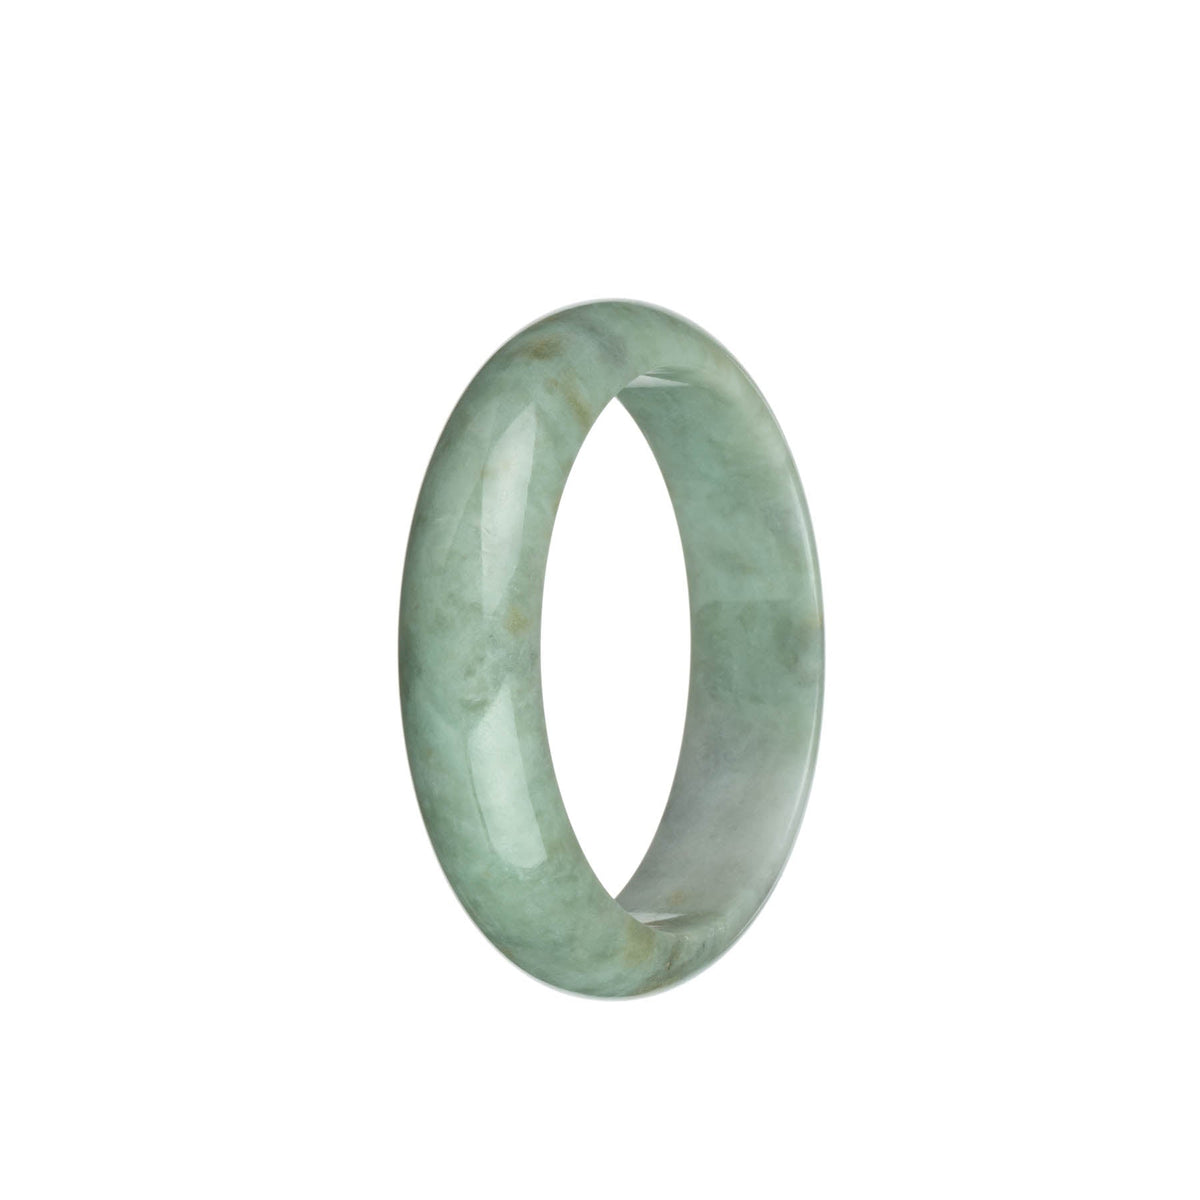 Genuine Natural Light Grey with Green and Brown Spots Jade Bracelet - 53mm Half Moon